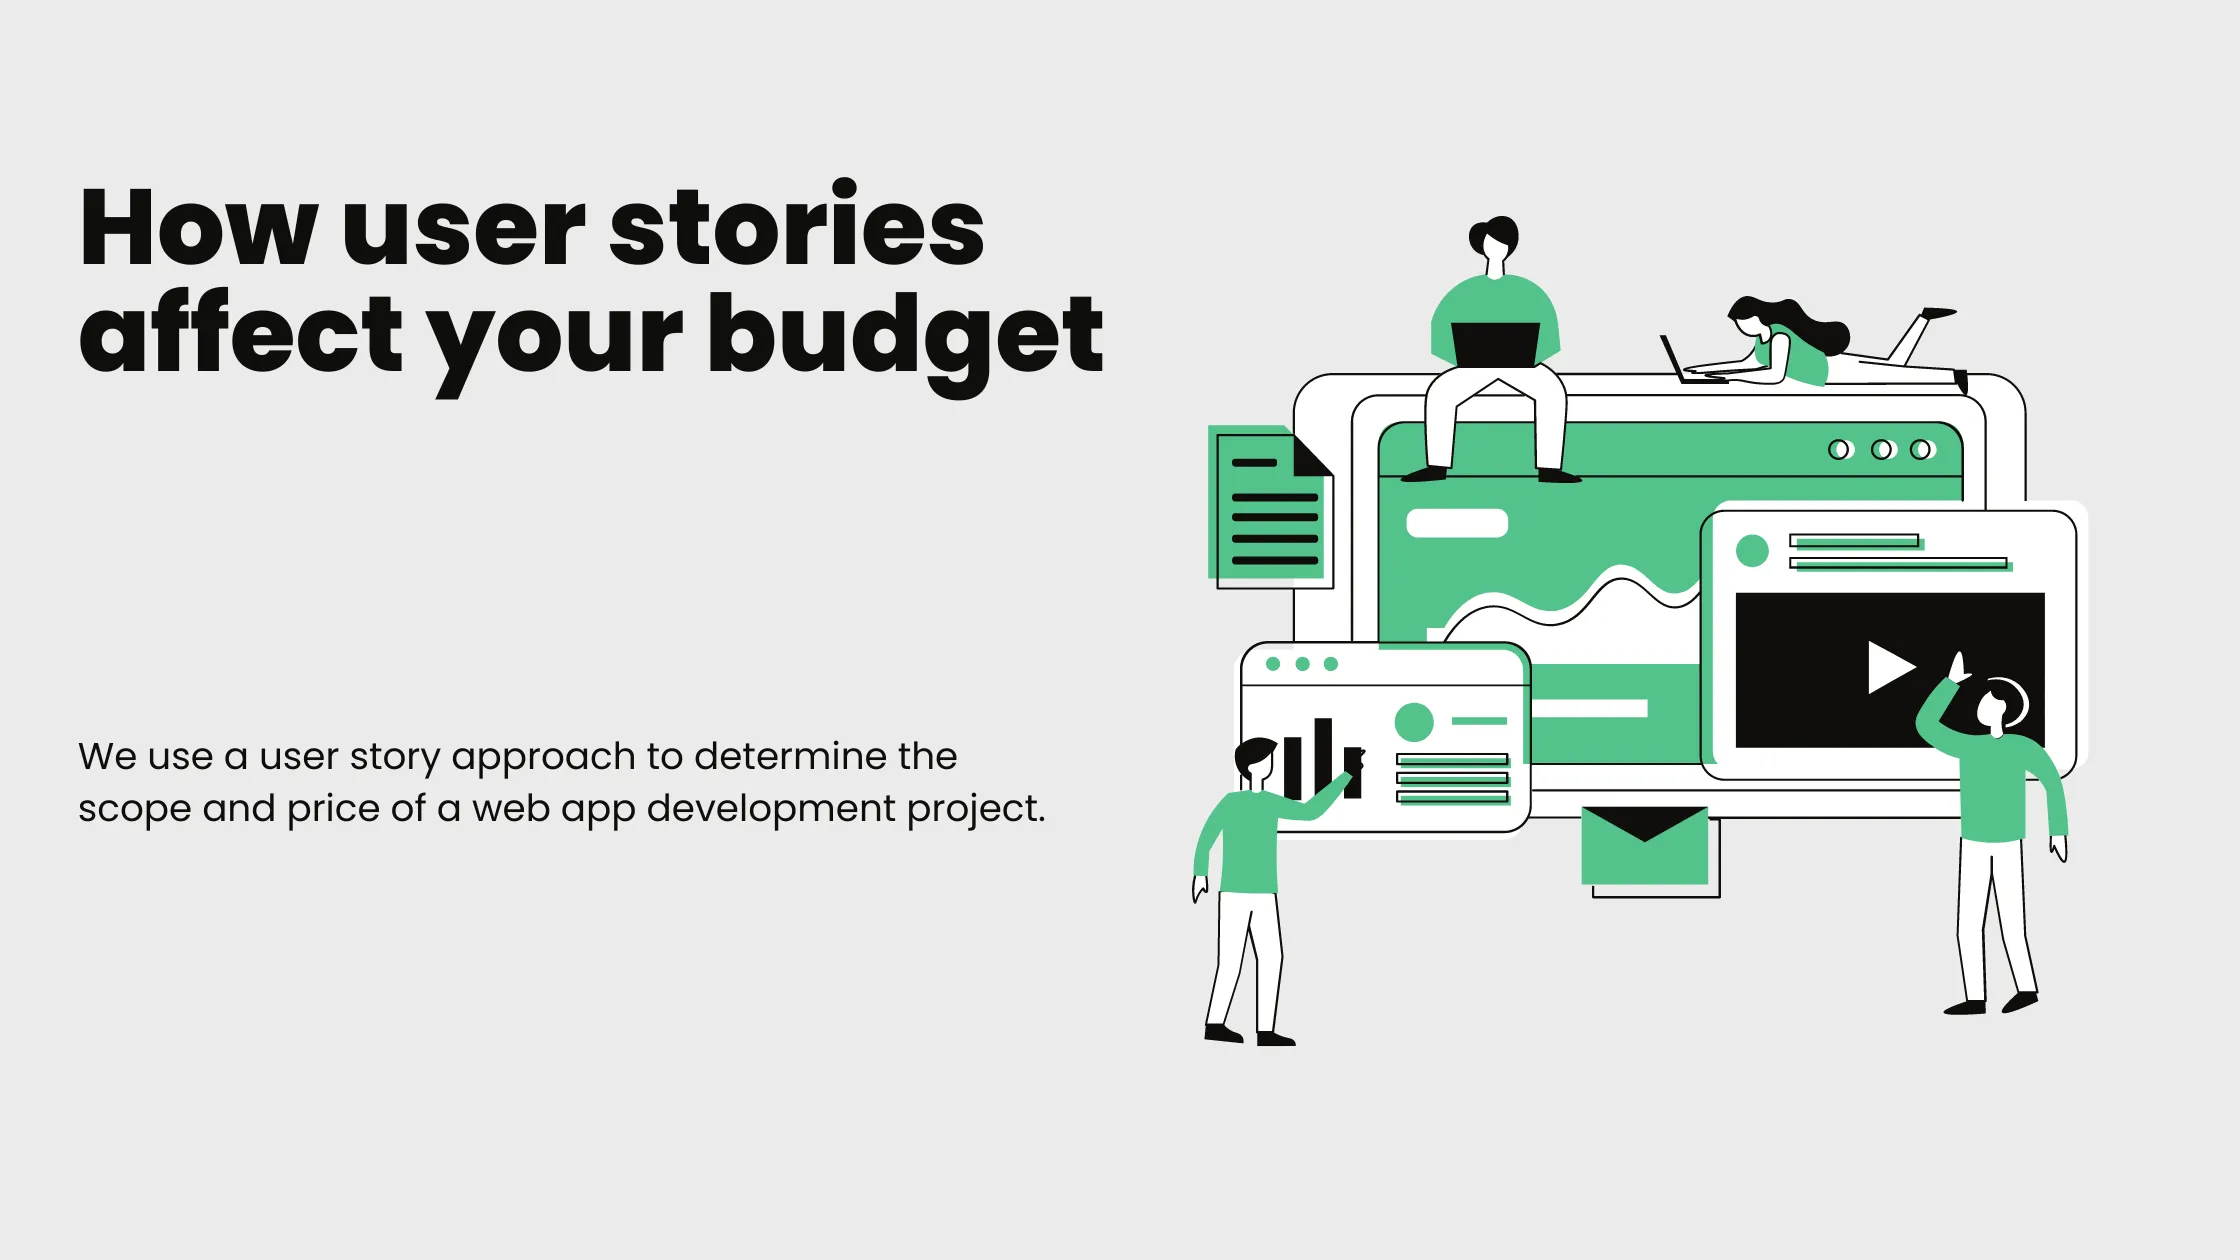 Building A Custom Web App? Here's How User Stories Affect Your Budget